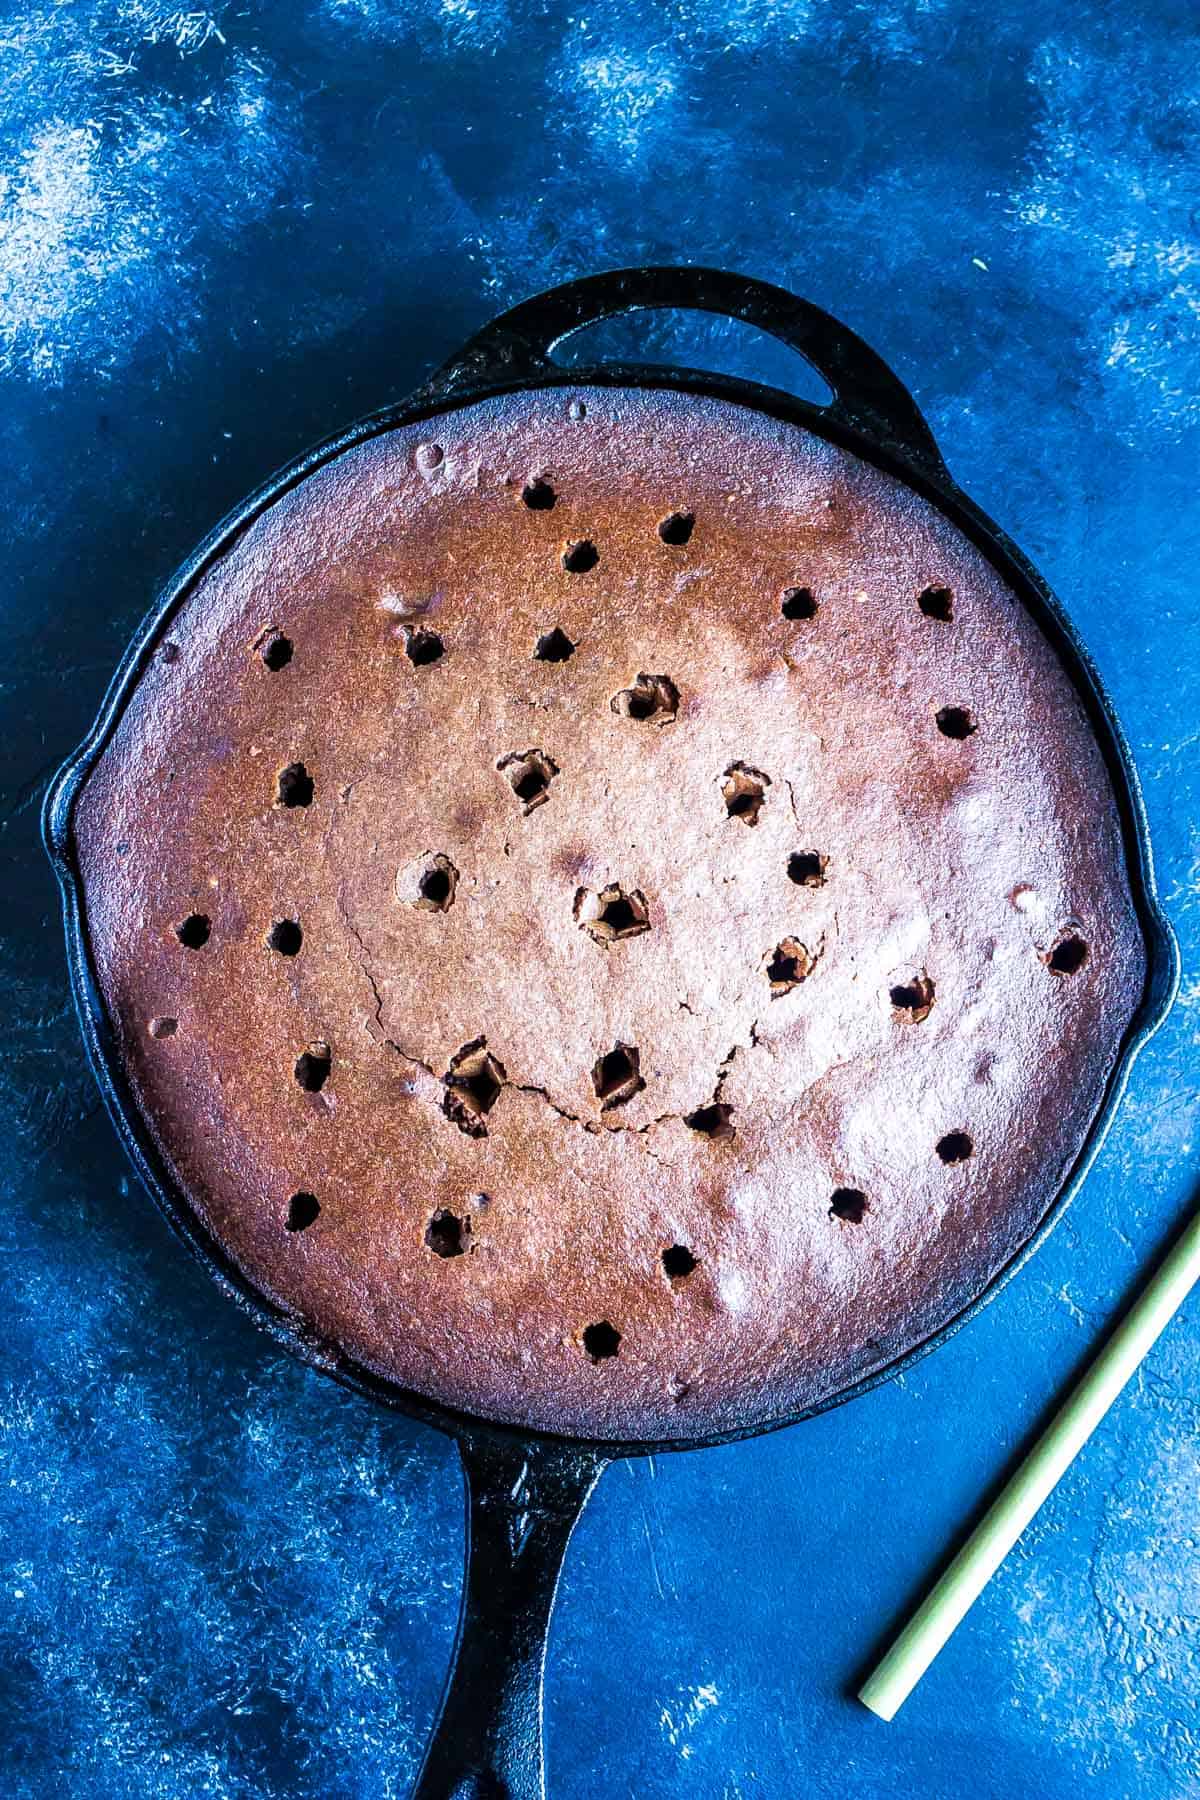 Chocolate Cake after being baked with holes poked into it.